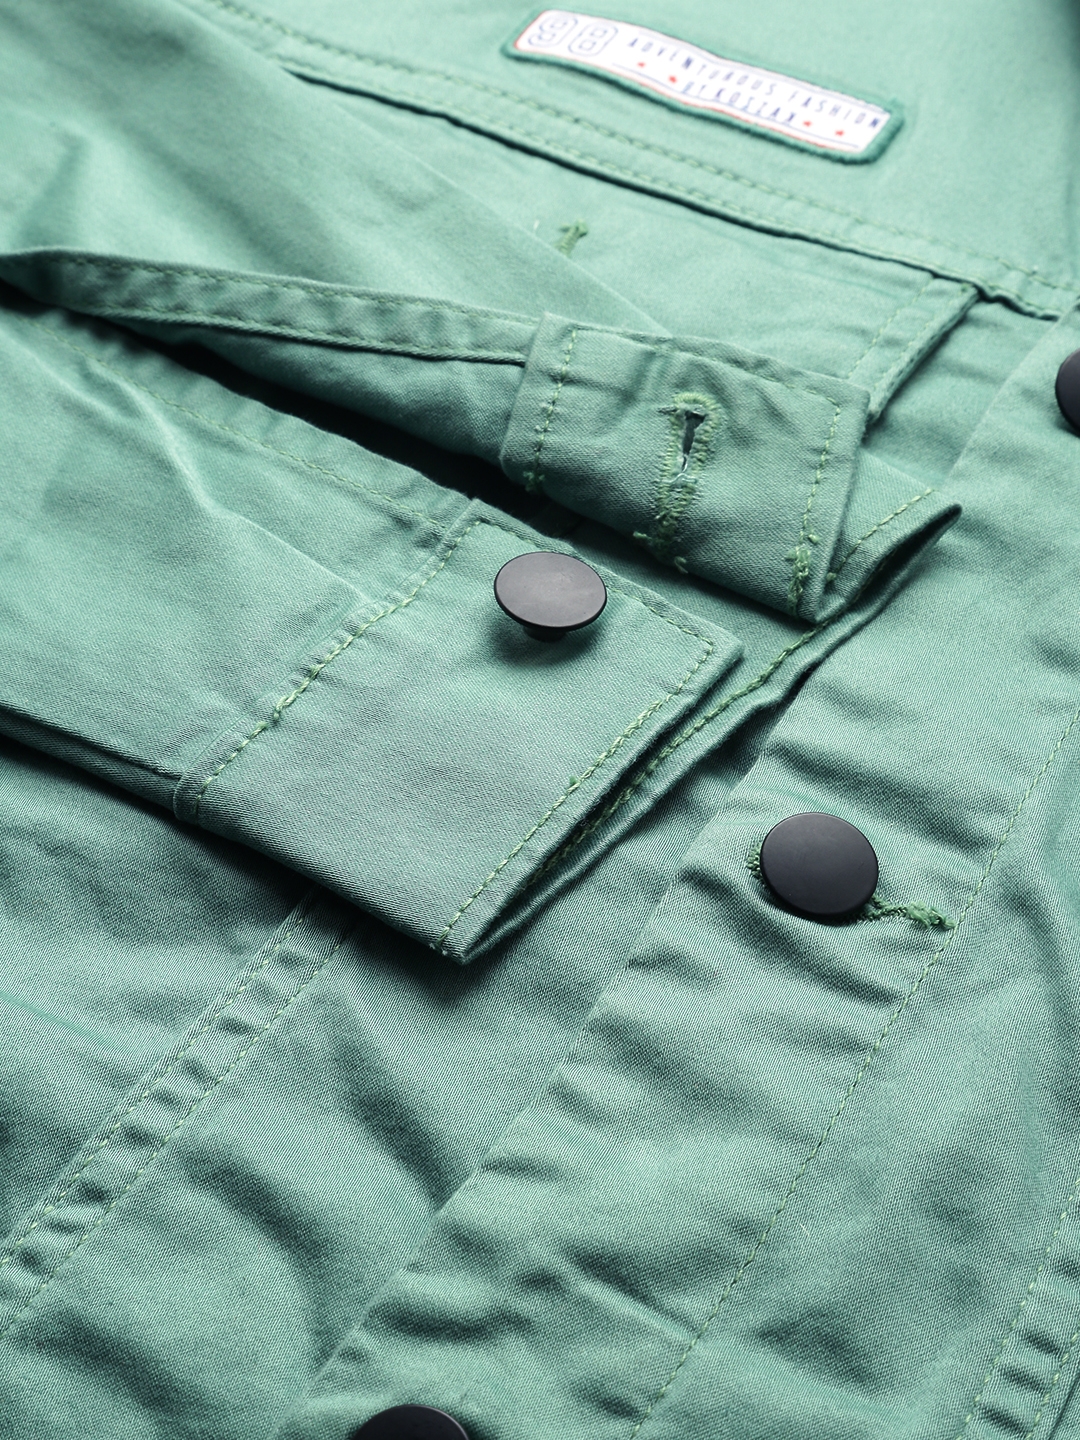 Men's Green Cotton Solid Casual Shirts